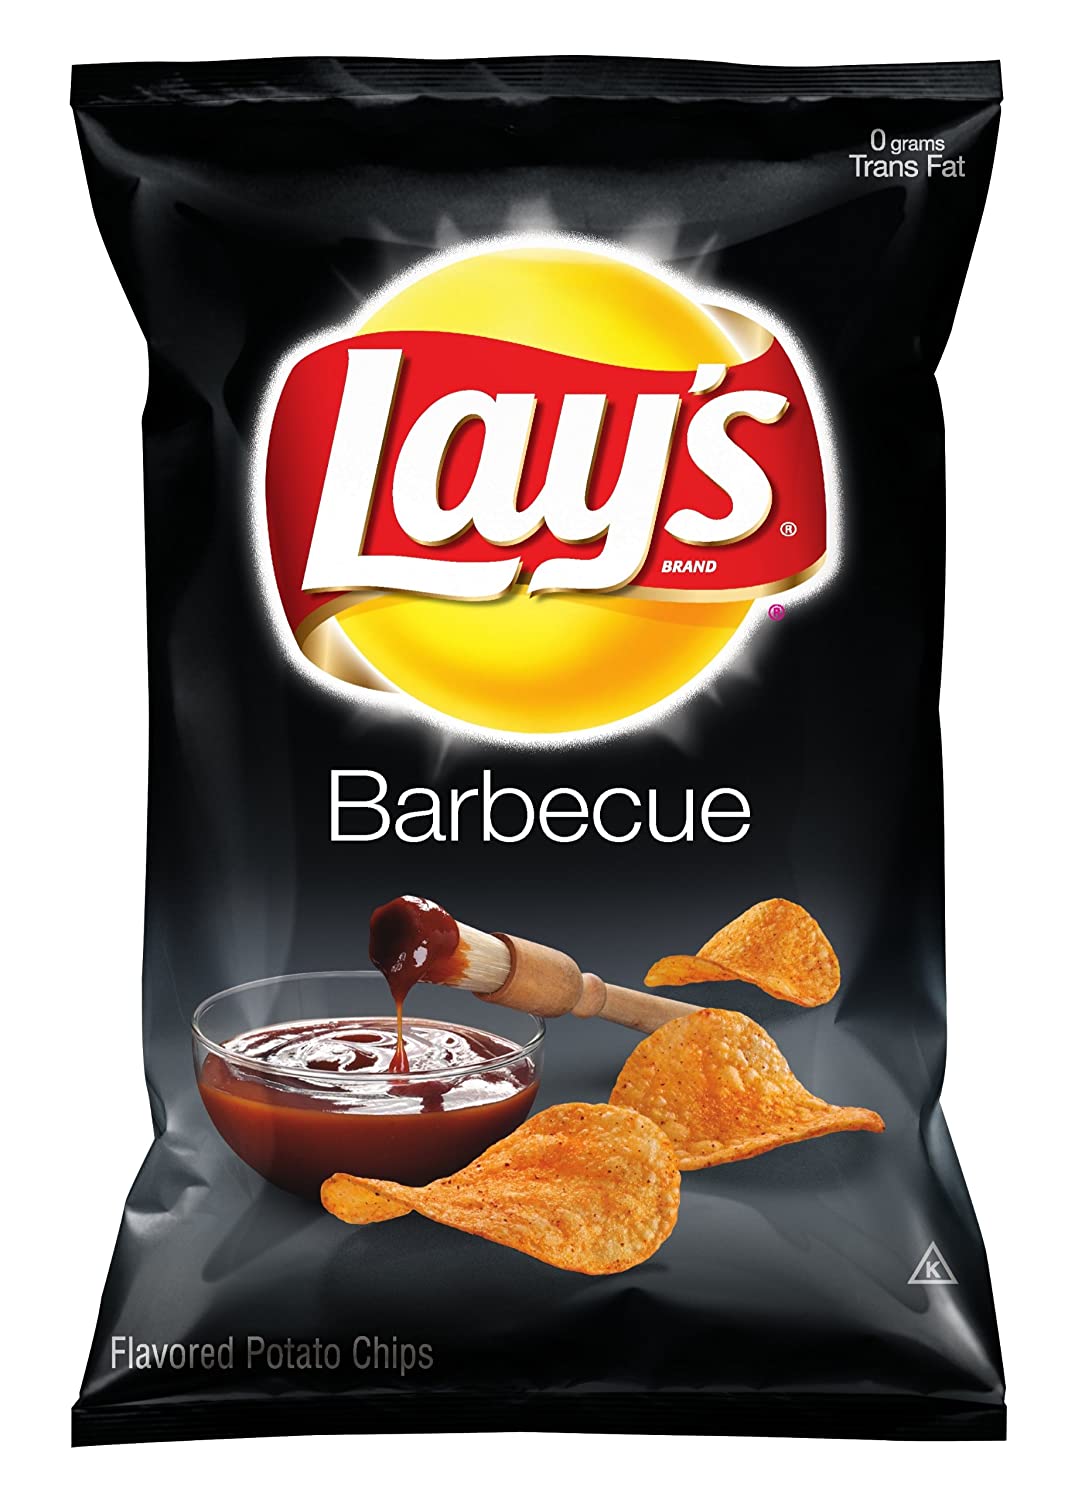 Allergy alert issued for select bags of Lay’s BBQ chips